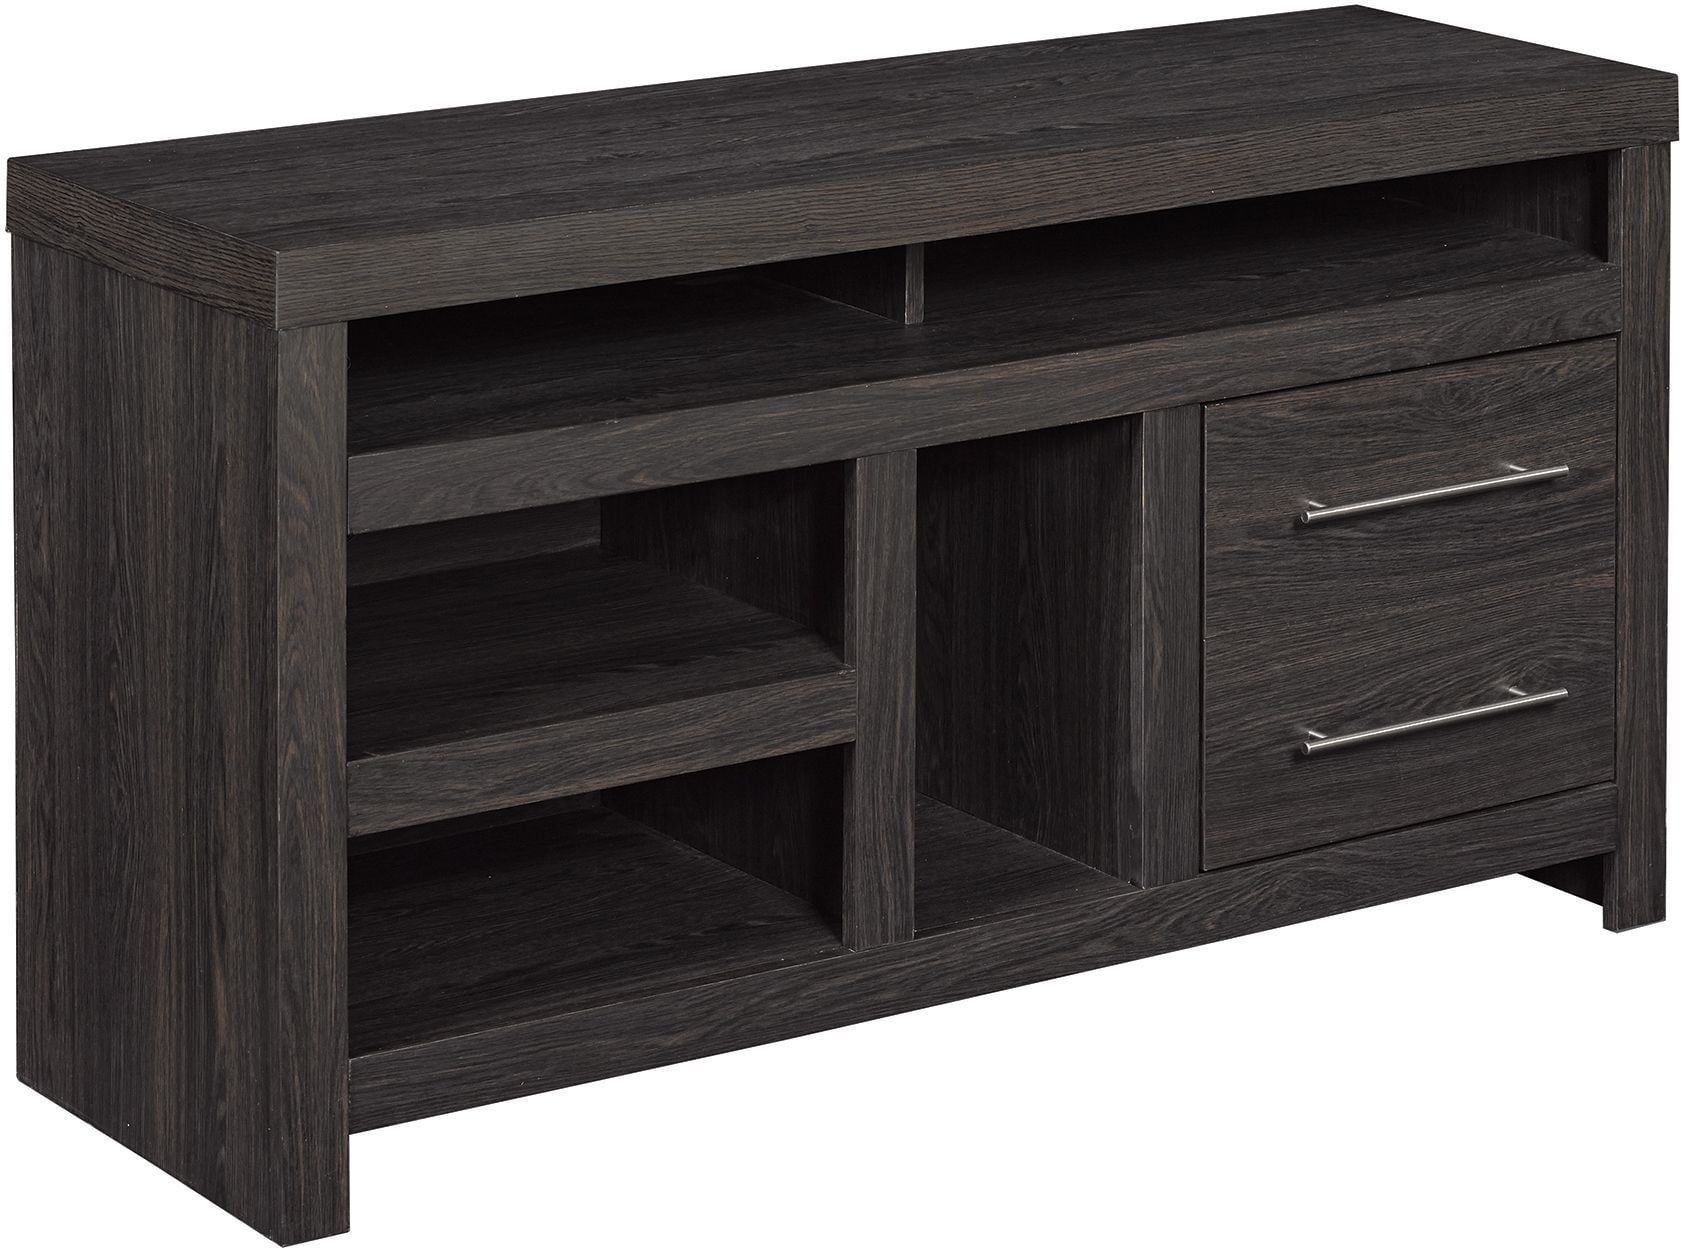 Bell'o Black Walnut Everson Tv Stand From Twin Star Throughout Walnut Tv Stand (View 2 of 15)